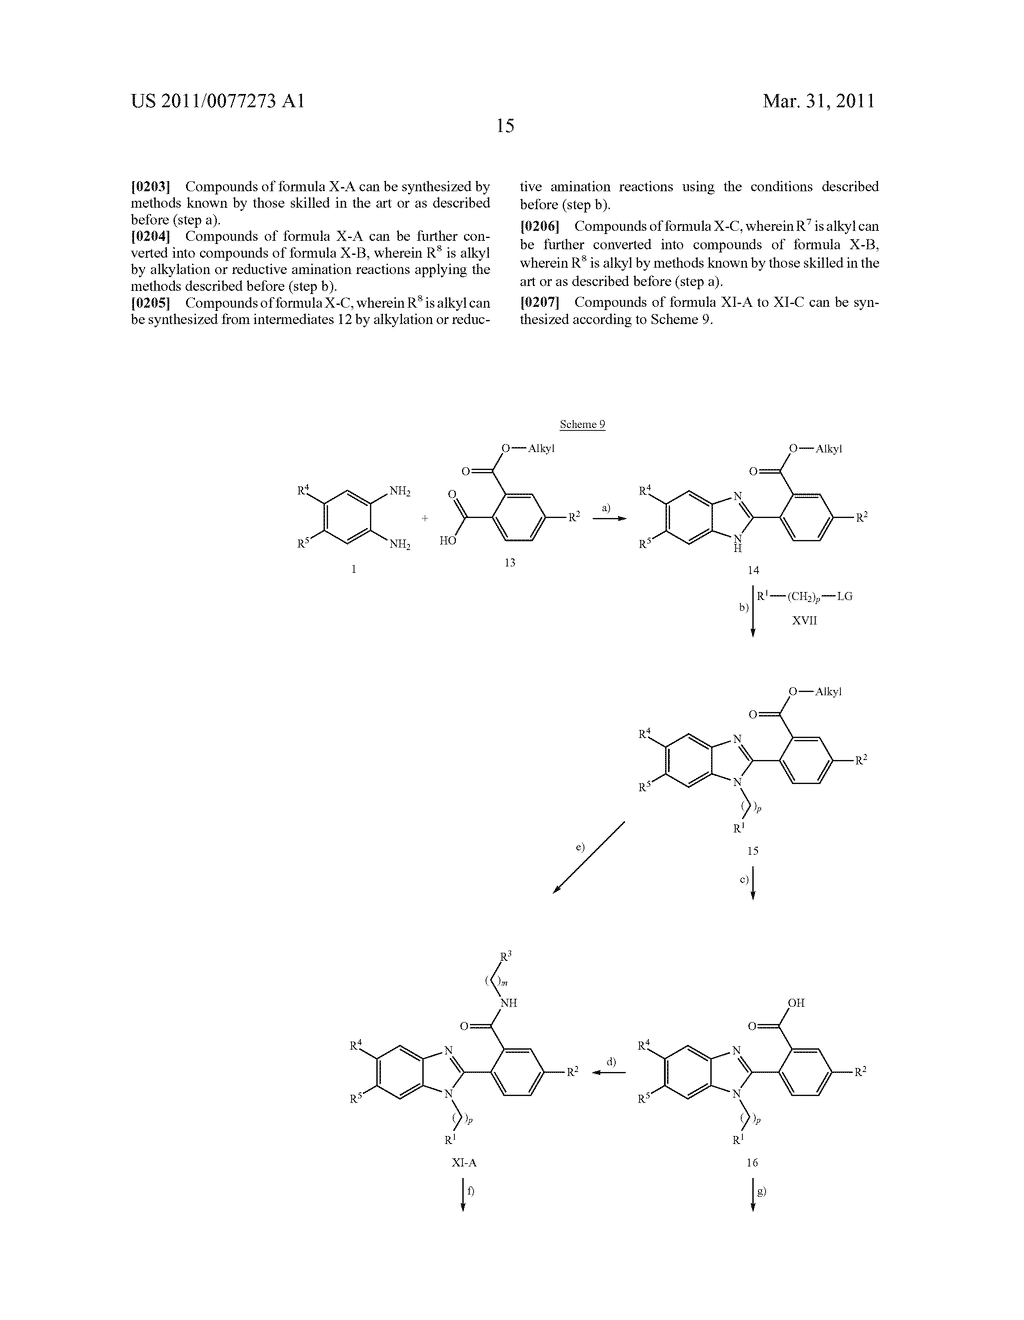 NEW BENZIMIDAZOLE DERIVATIVES - diagram, schematic, and image 16